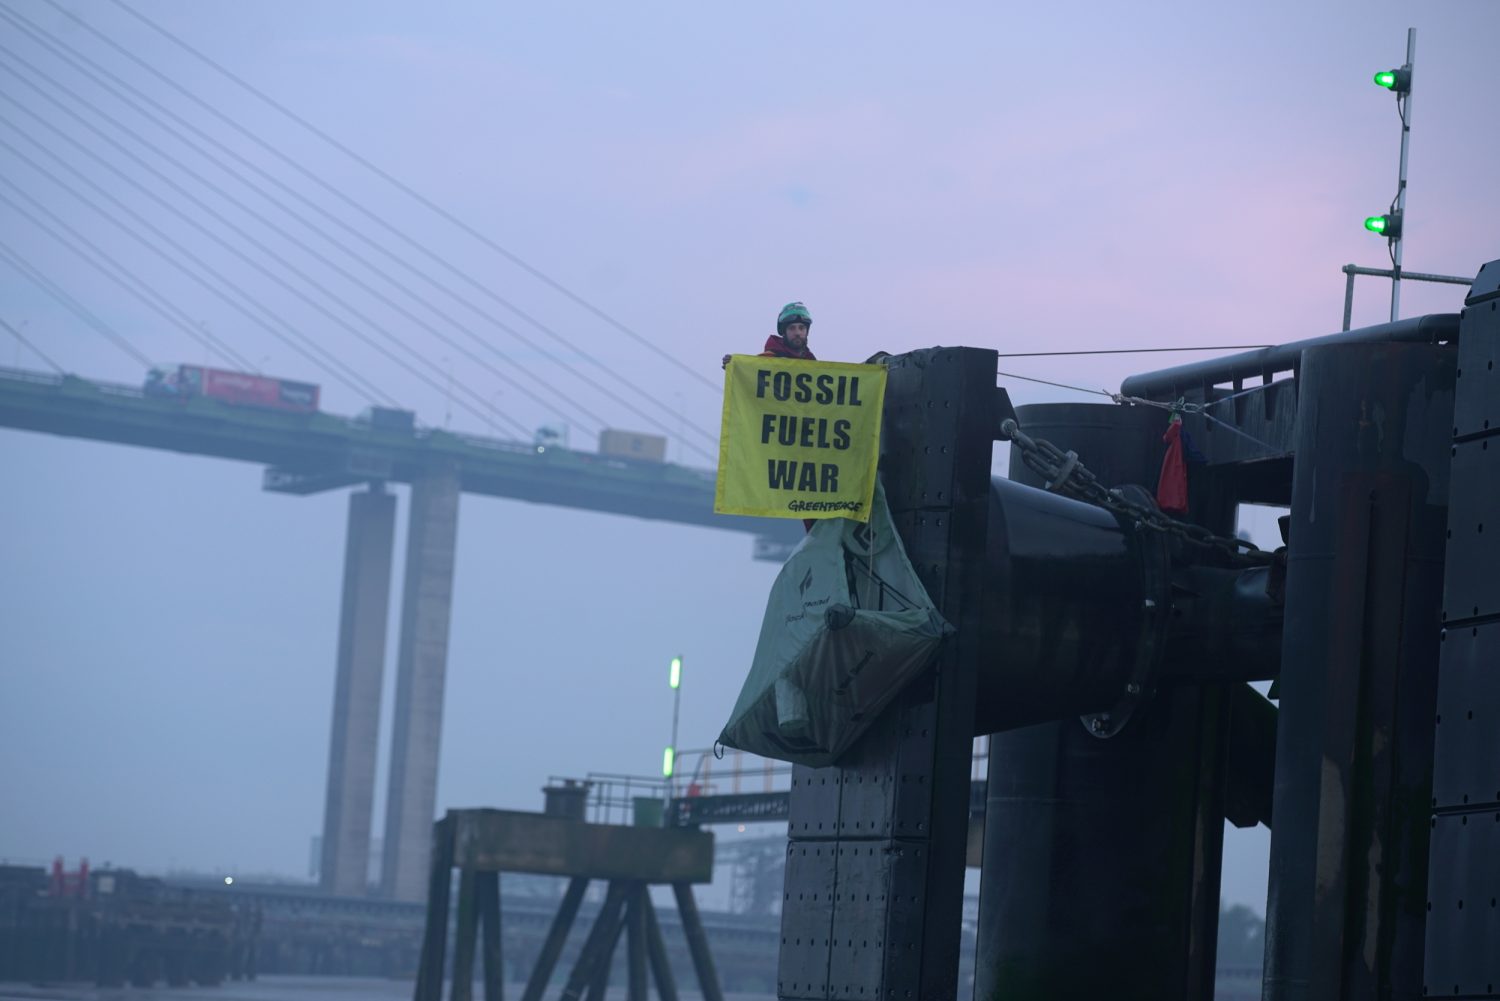 Benji Bailes pictured during the Greenpeace protest on the River Thames in April (credit Fionn Guilfoyle/Greenpeace)